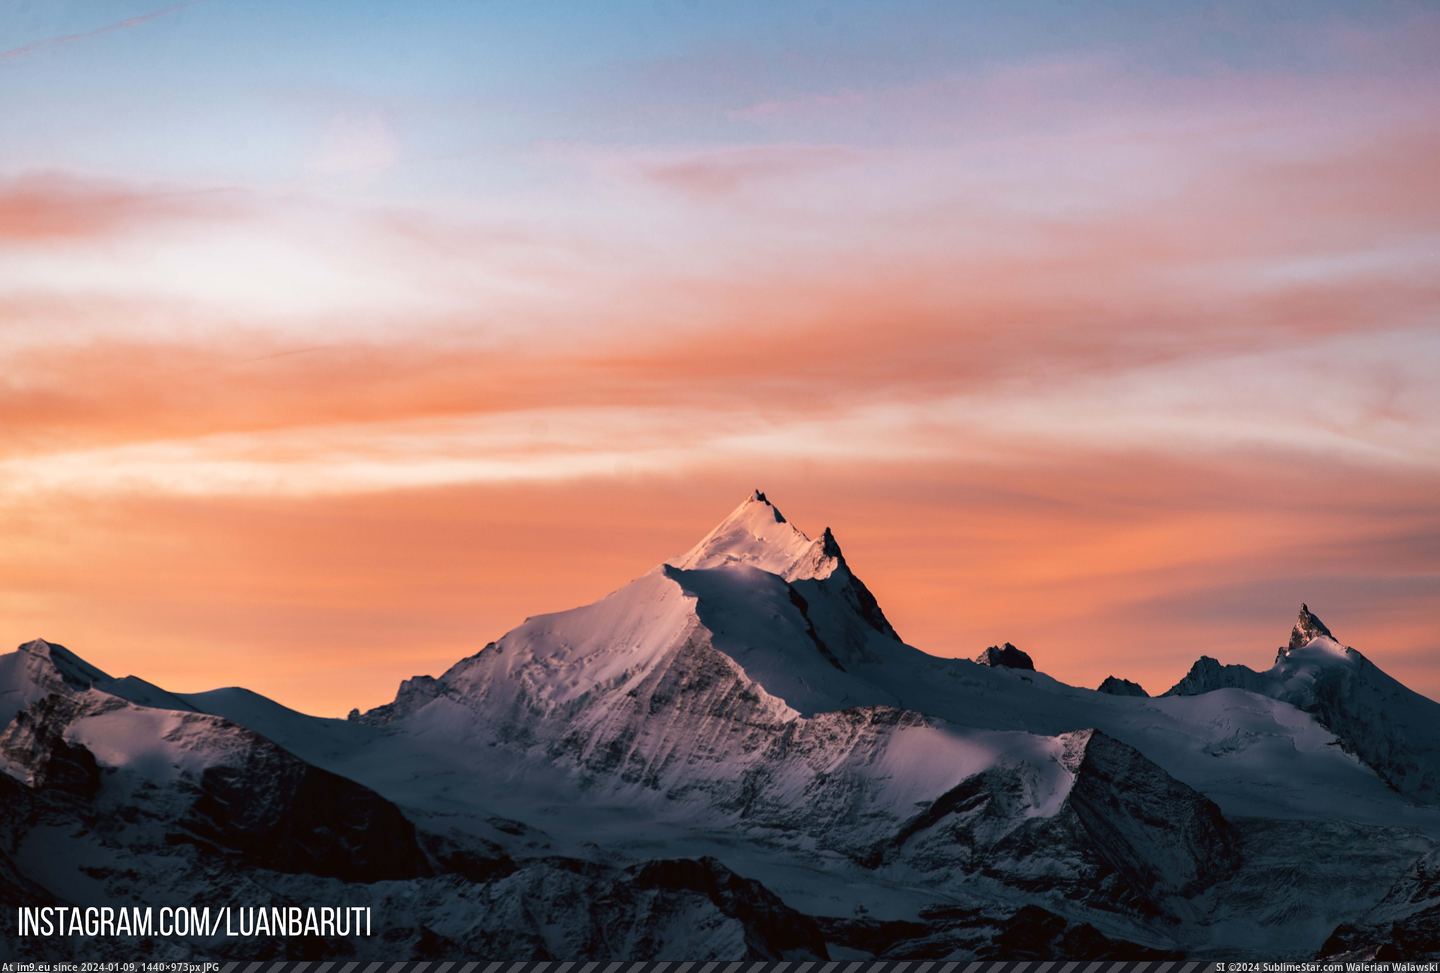 #Night #Original #Dawn #Catch #File #Spent #Mountain [Earthporn] I spent the night on 10.000ft to catch the Weisshorn mountain at dawn. [original file in comments] [6016x4016] Pic. (Изображение из альбом My r/EARTHPORN favs))